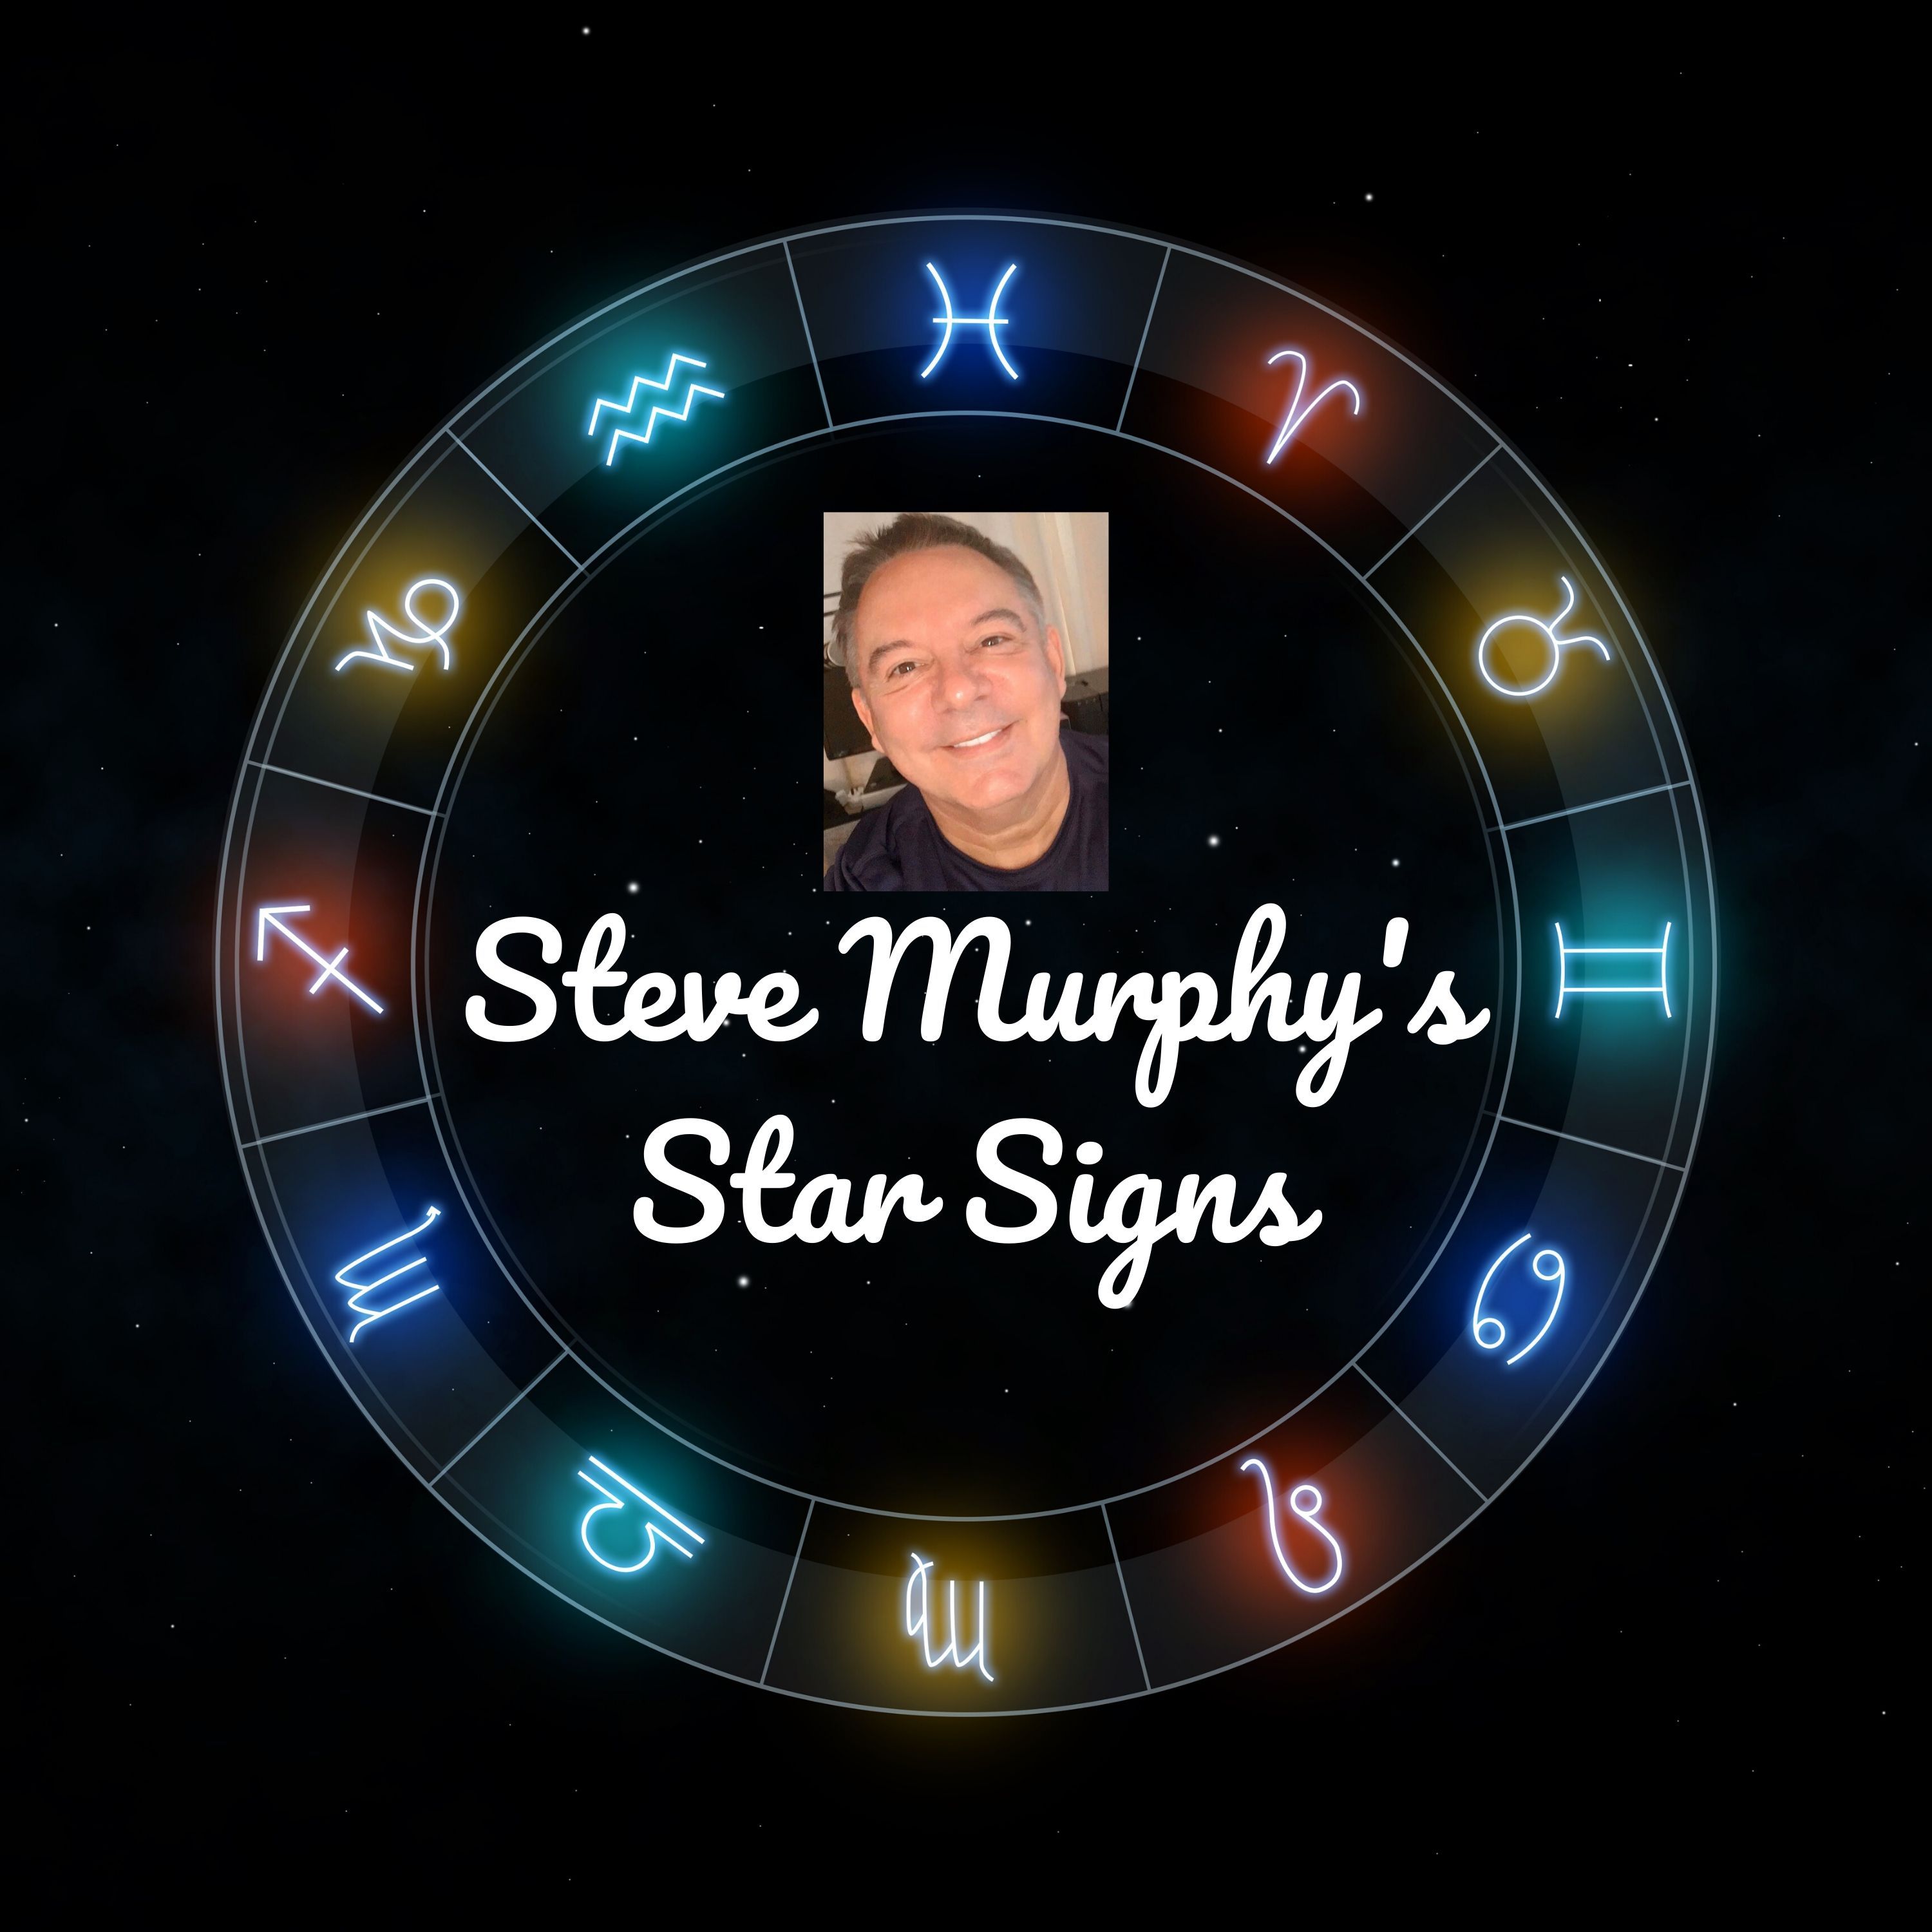 Star Signs Report w/c 11th May 2020